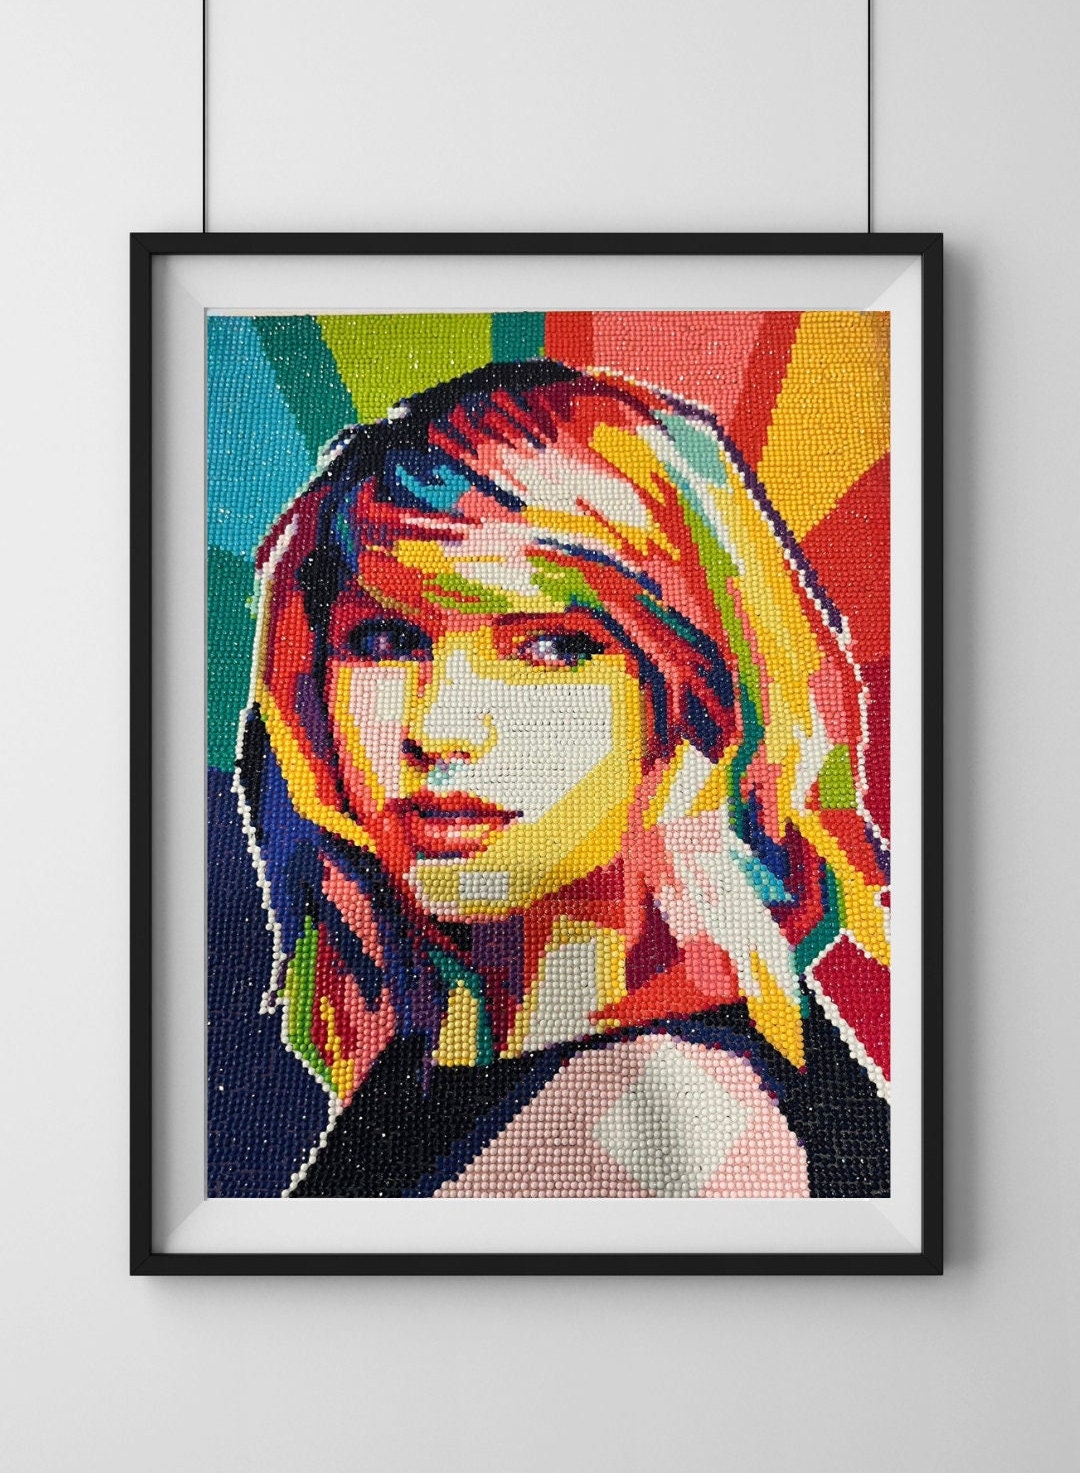 Taylor Swift Completed Diamond Art Painting, Completed Diamond Art, Eras  Tour Diamond Painting, Wall Decor, Pop Culture Art, Poster